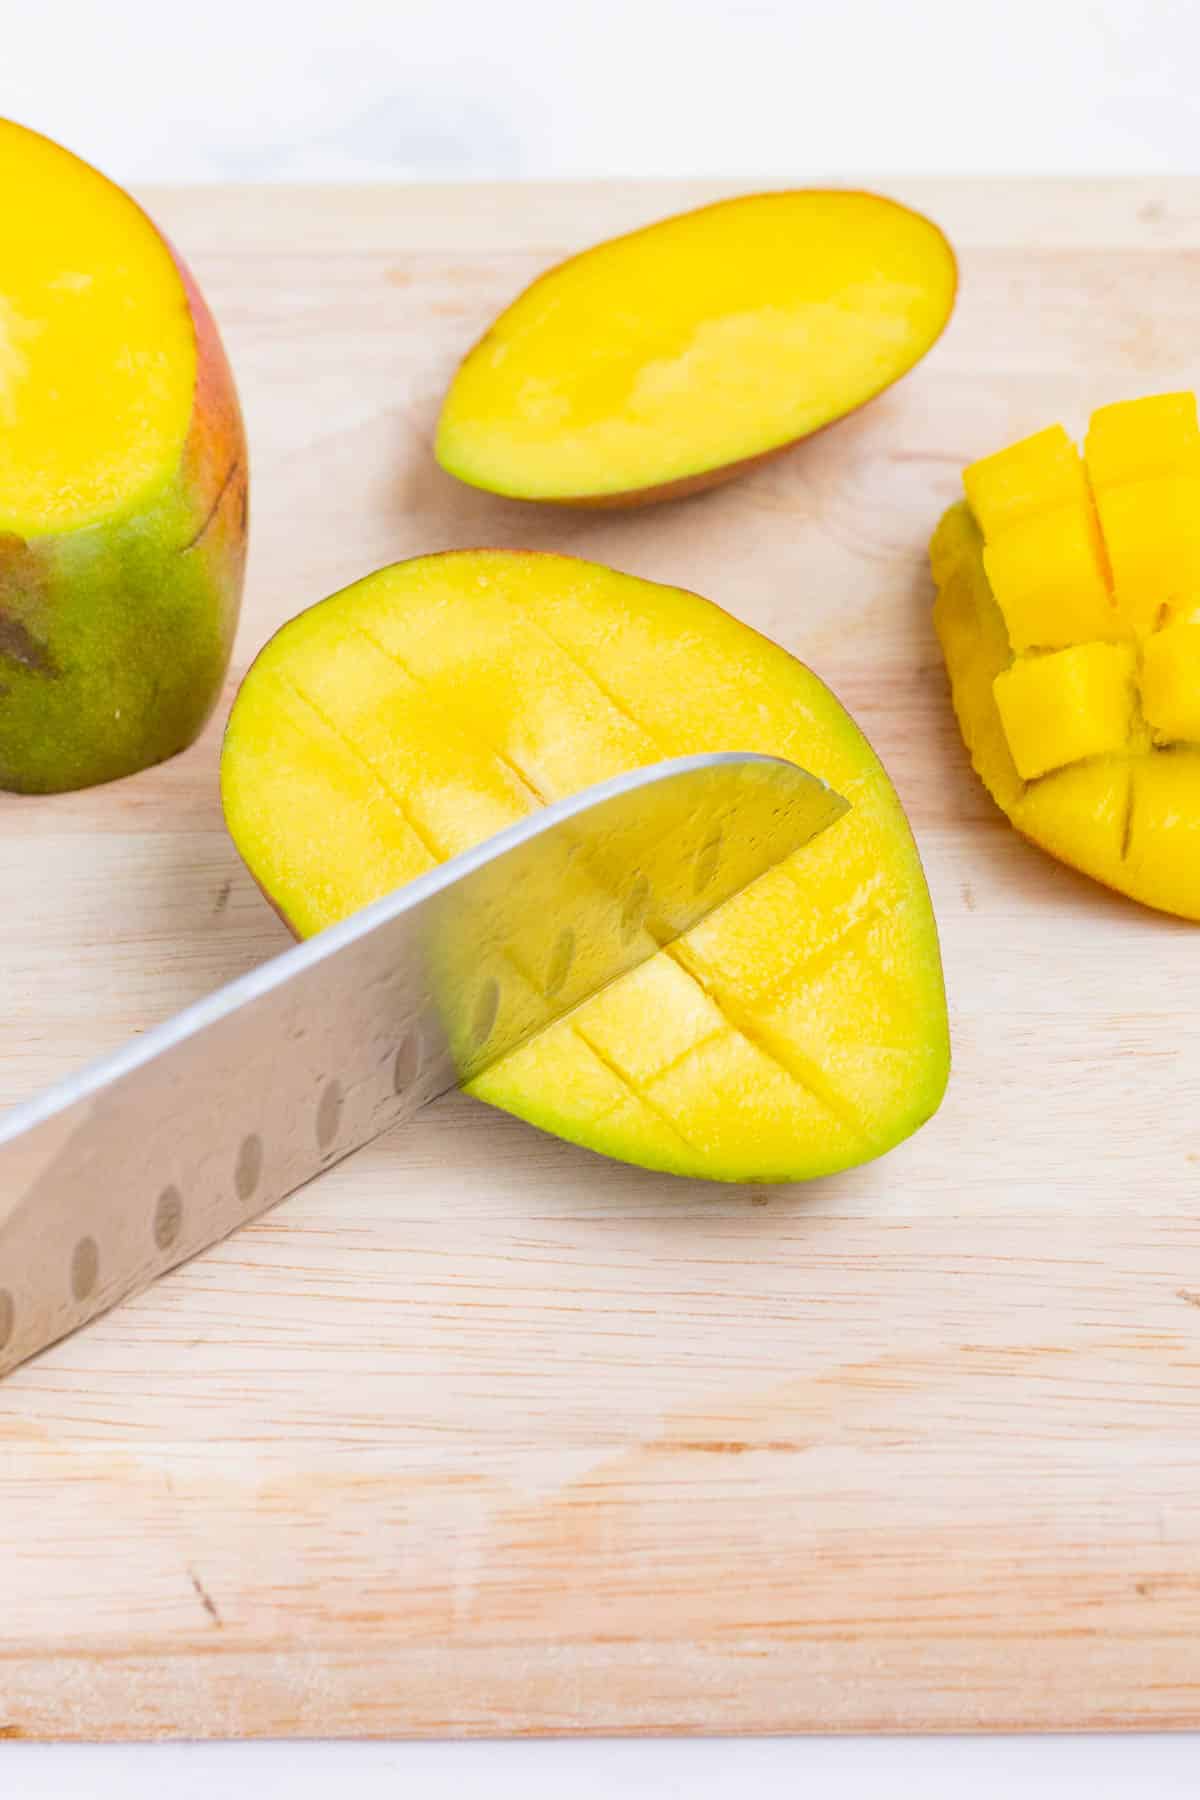 A sharp knife cuts a mango into small pieces.